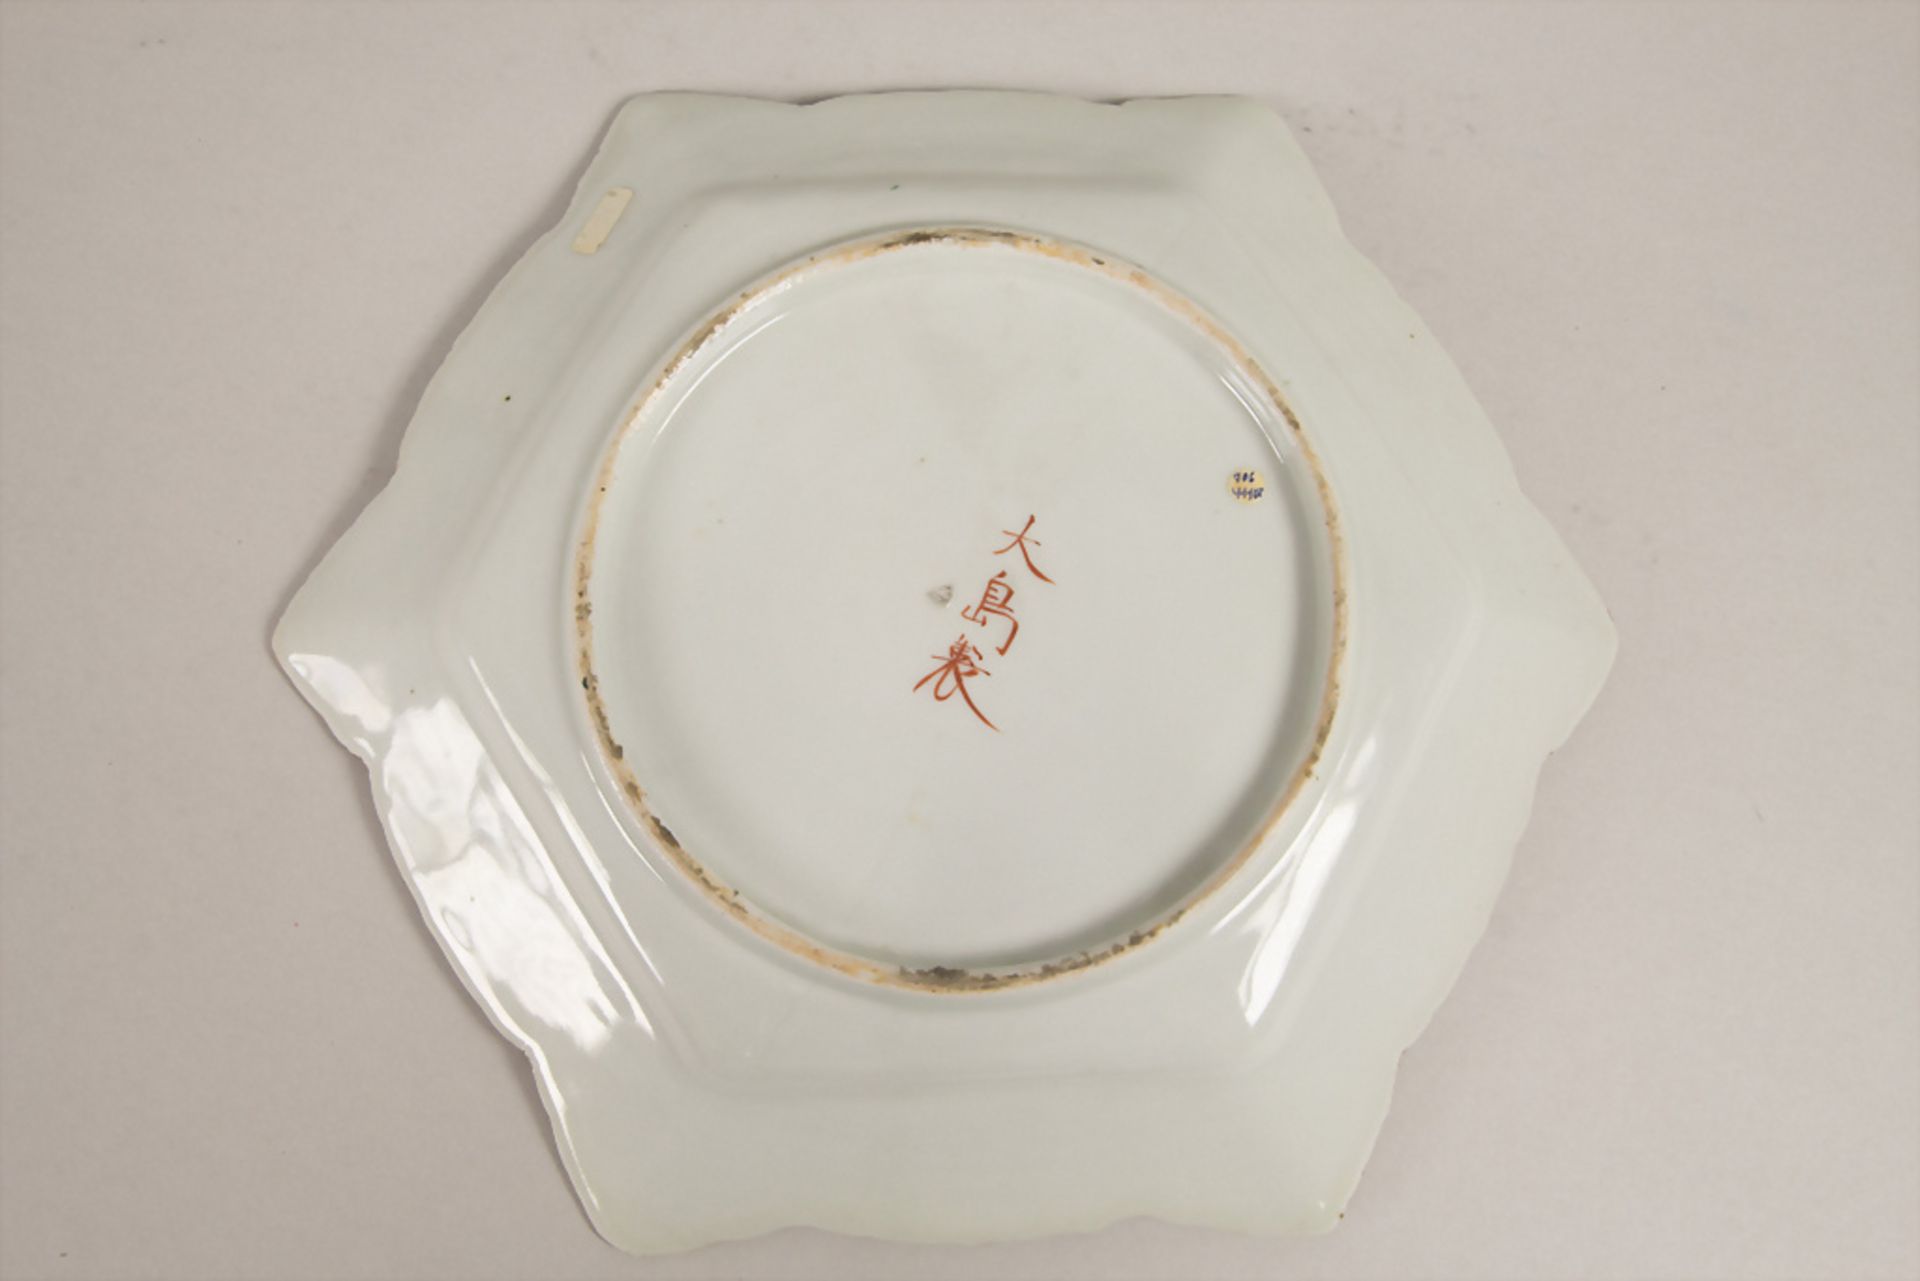 Zierteller / A decorative plate, China oder Japan, 19. Jh. - Image 6 of 6